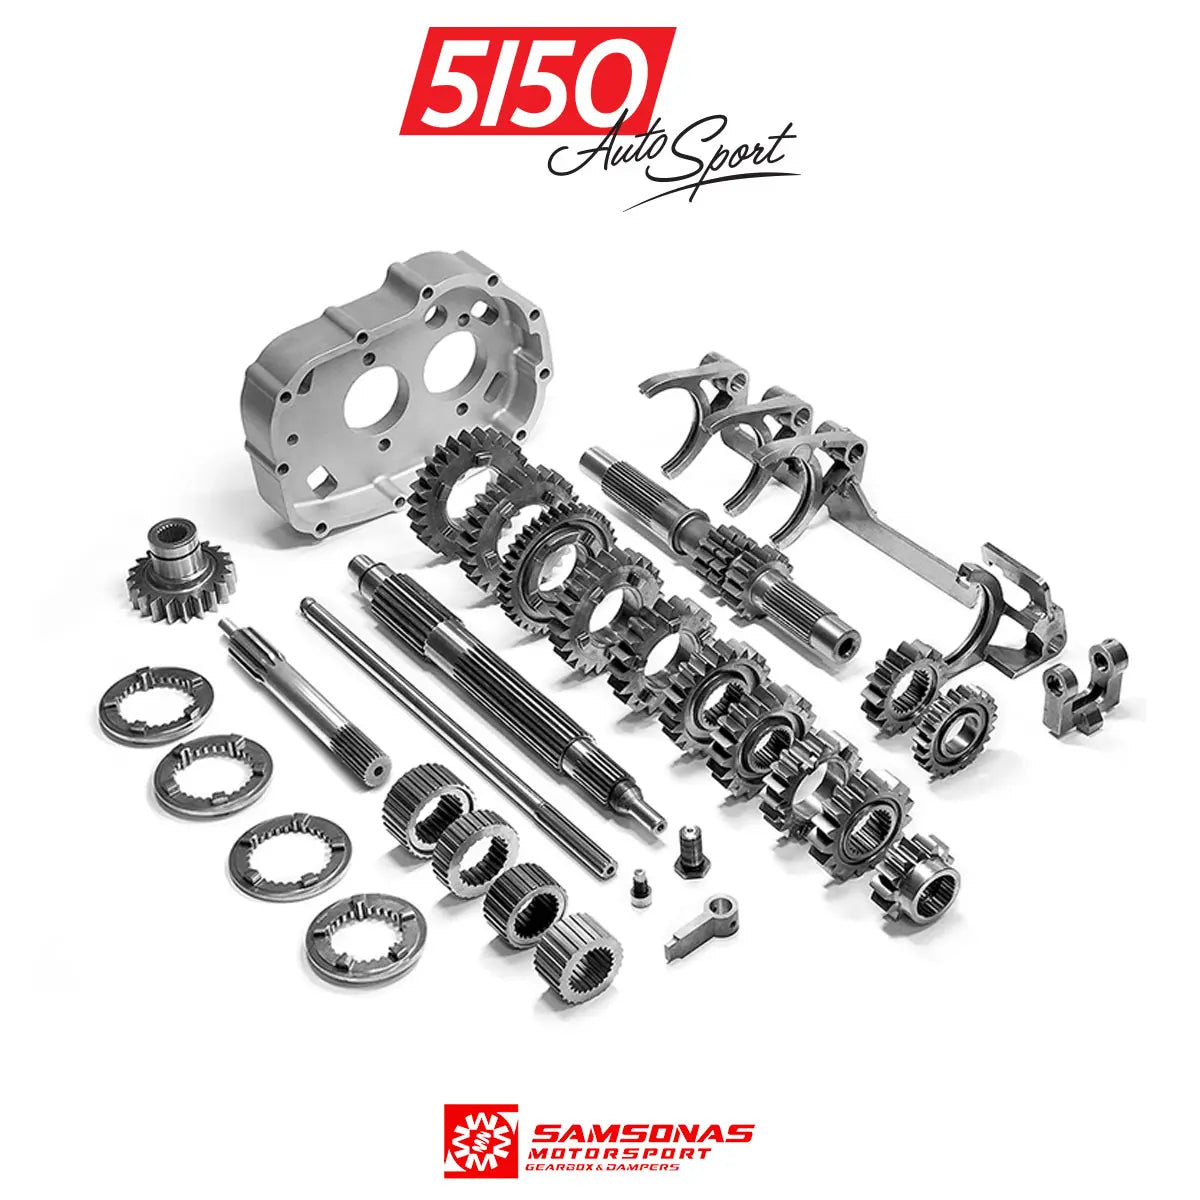 6-Speed Sequential Transmission Gear Kit by Samsonas for BMW E36